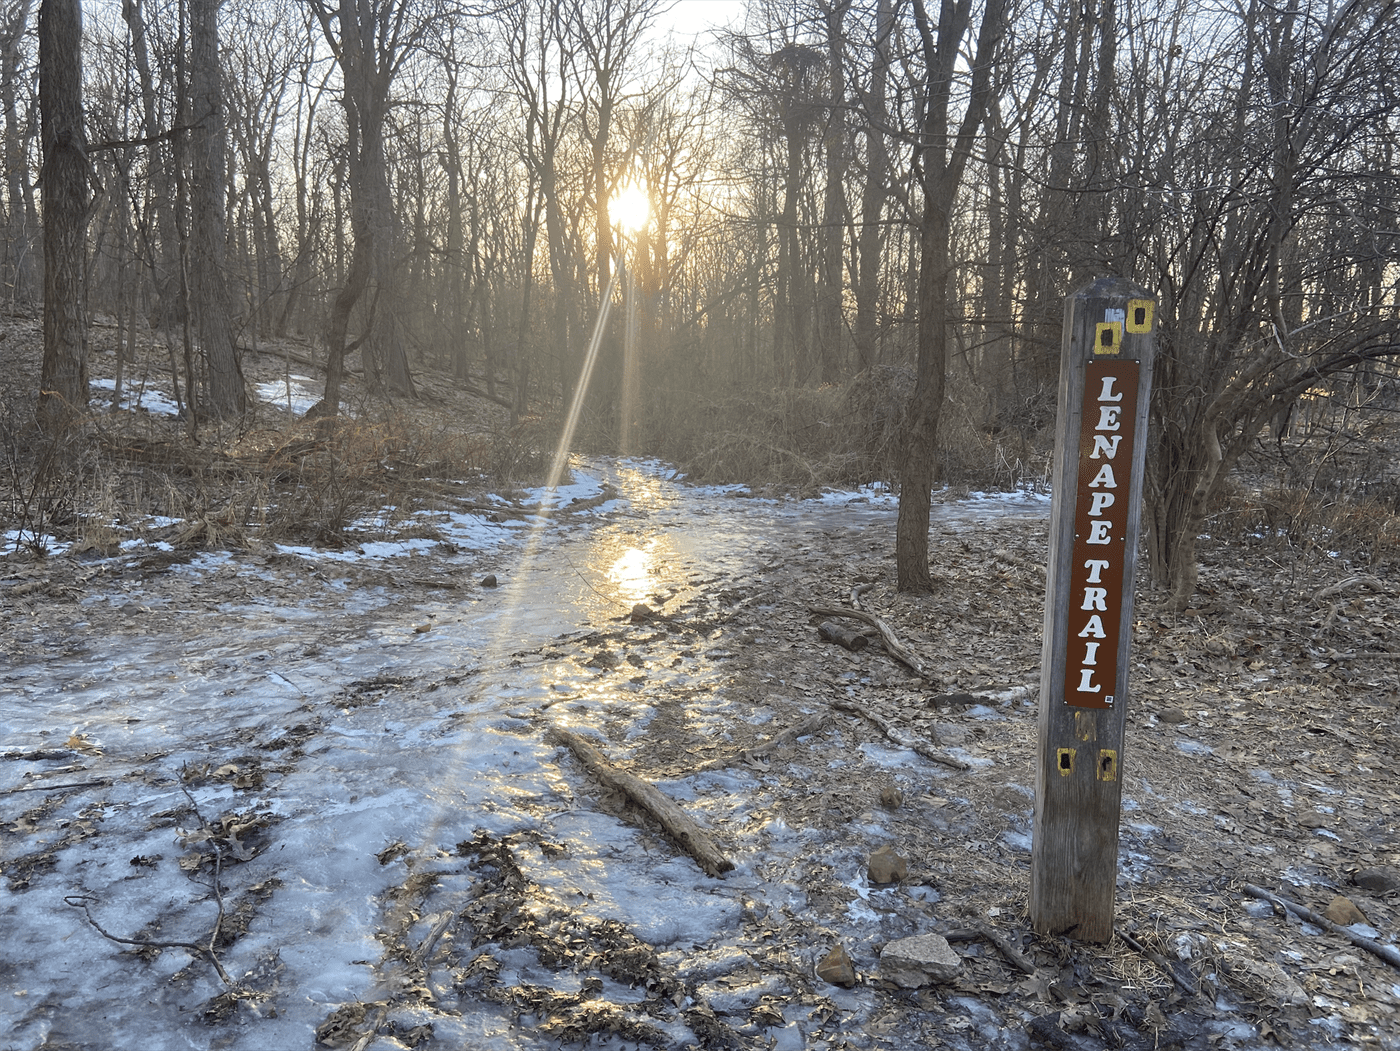 Mills Reservation is less than a five minute drive from campus. Just watch out for ice! Emma Caughlan | The Montclarion